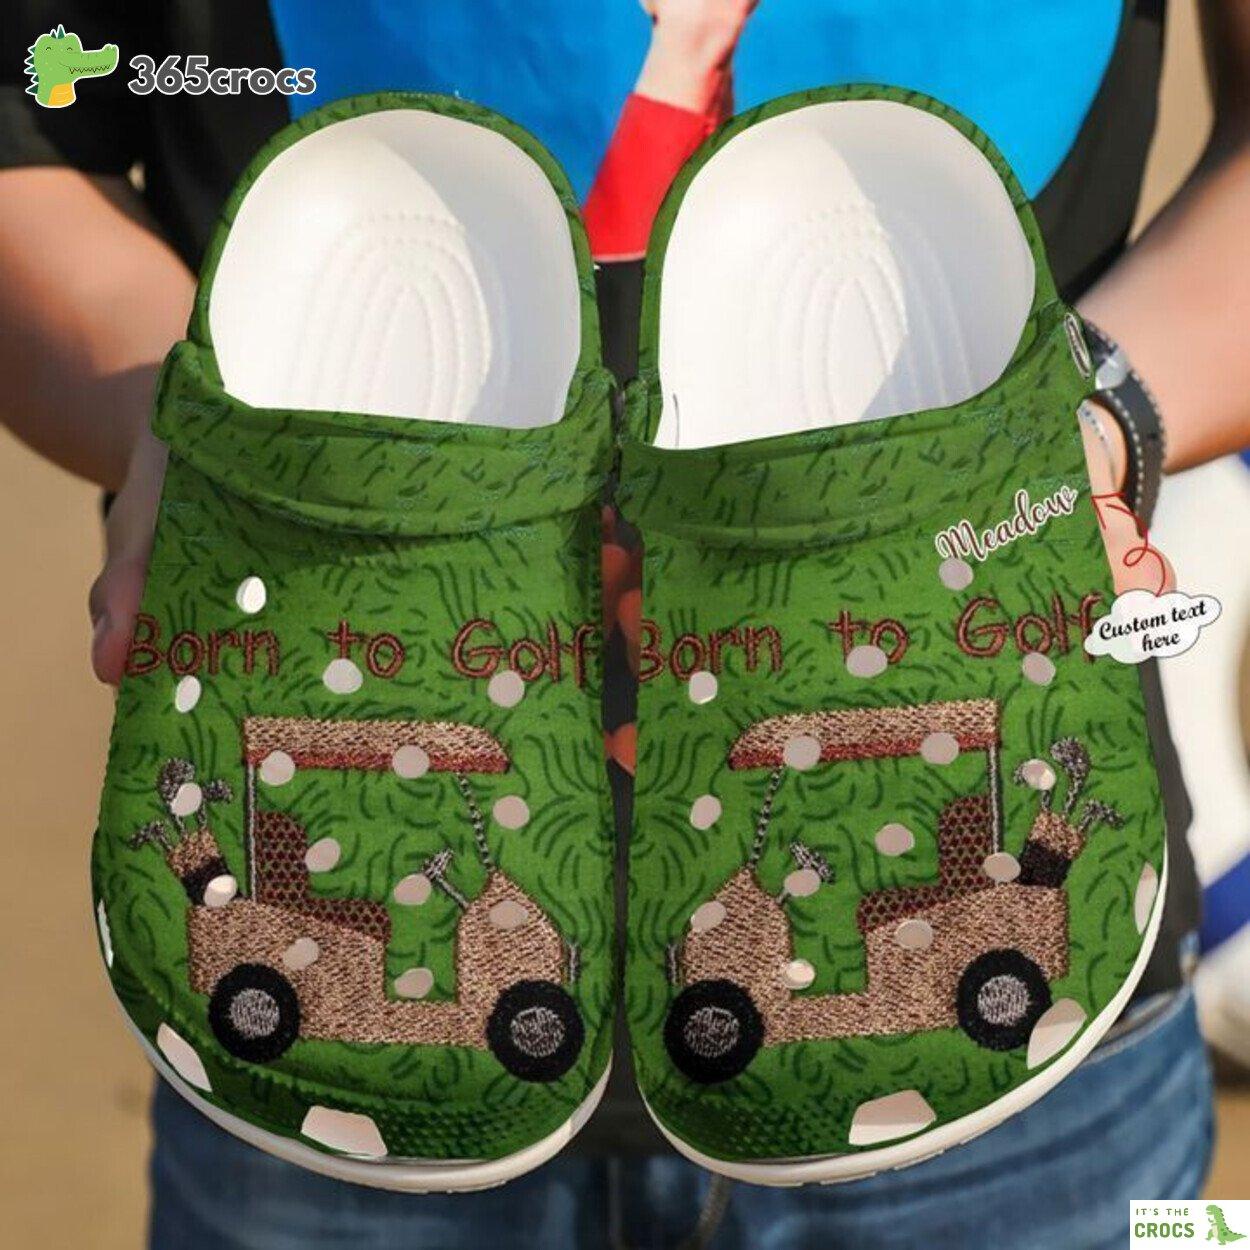 Celebrate Golf Enthusiasm Born to Play Golf Personalized Clogs